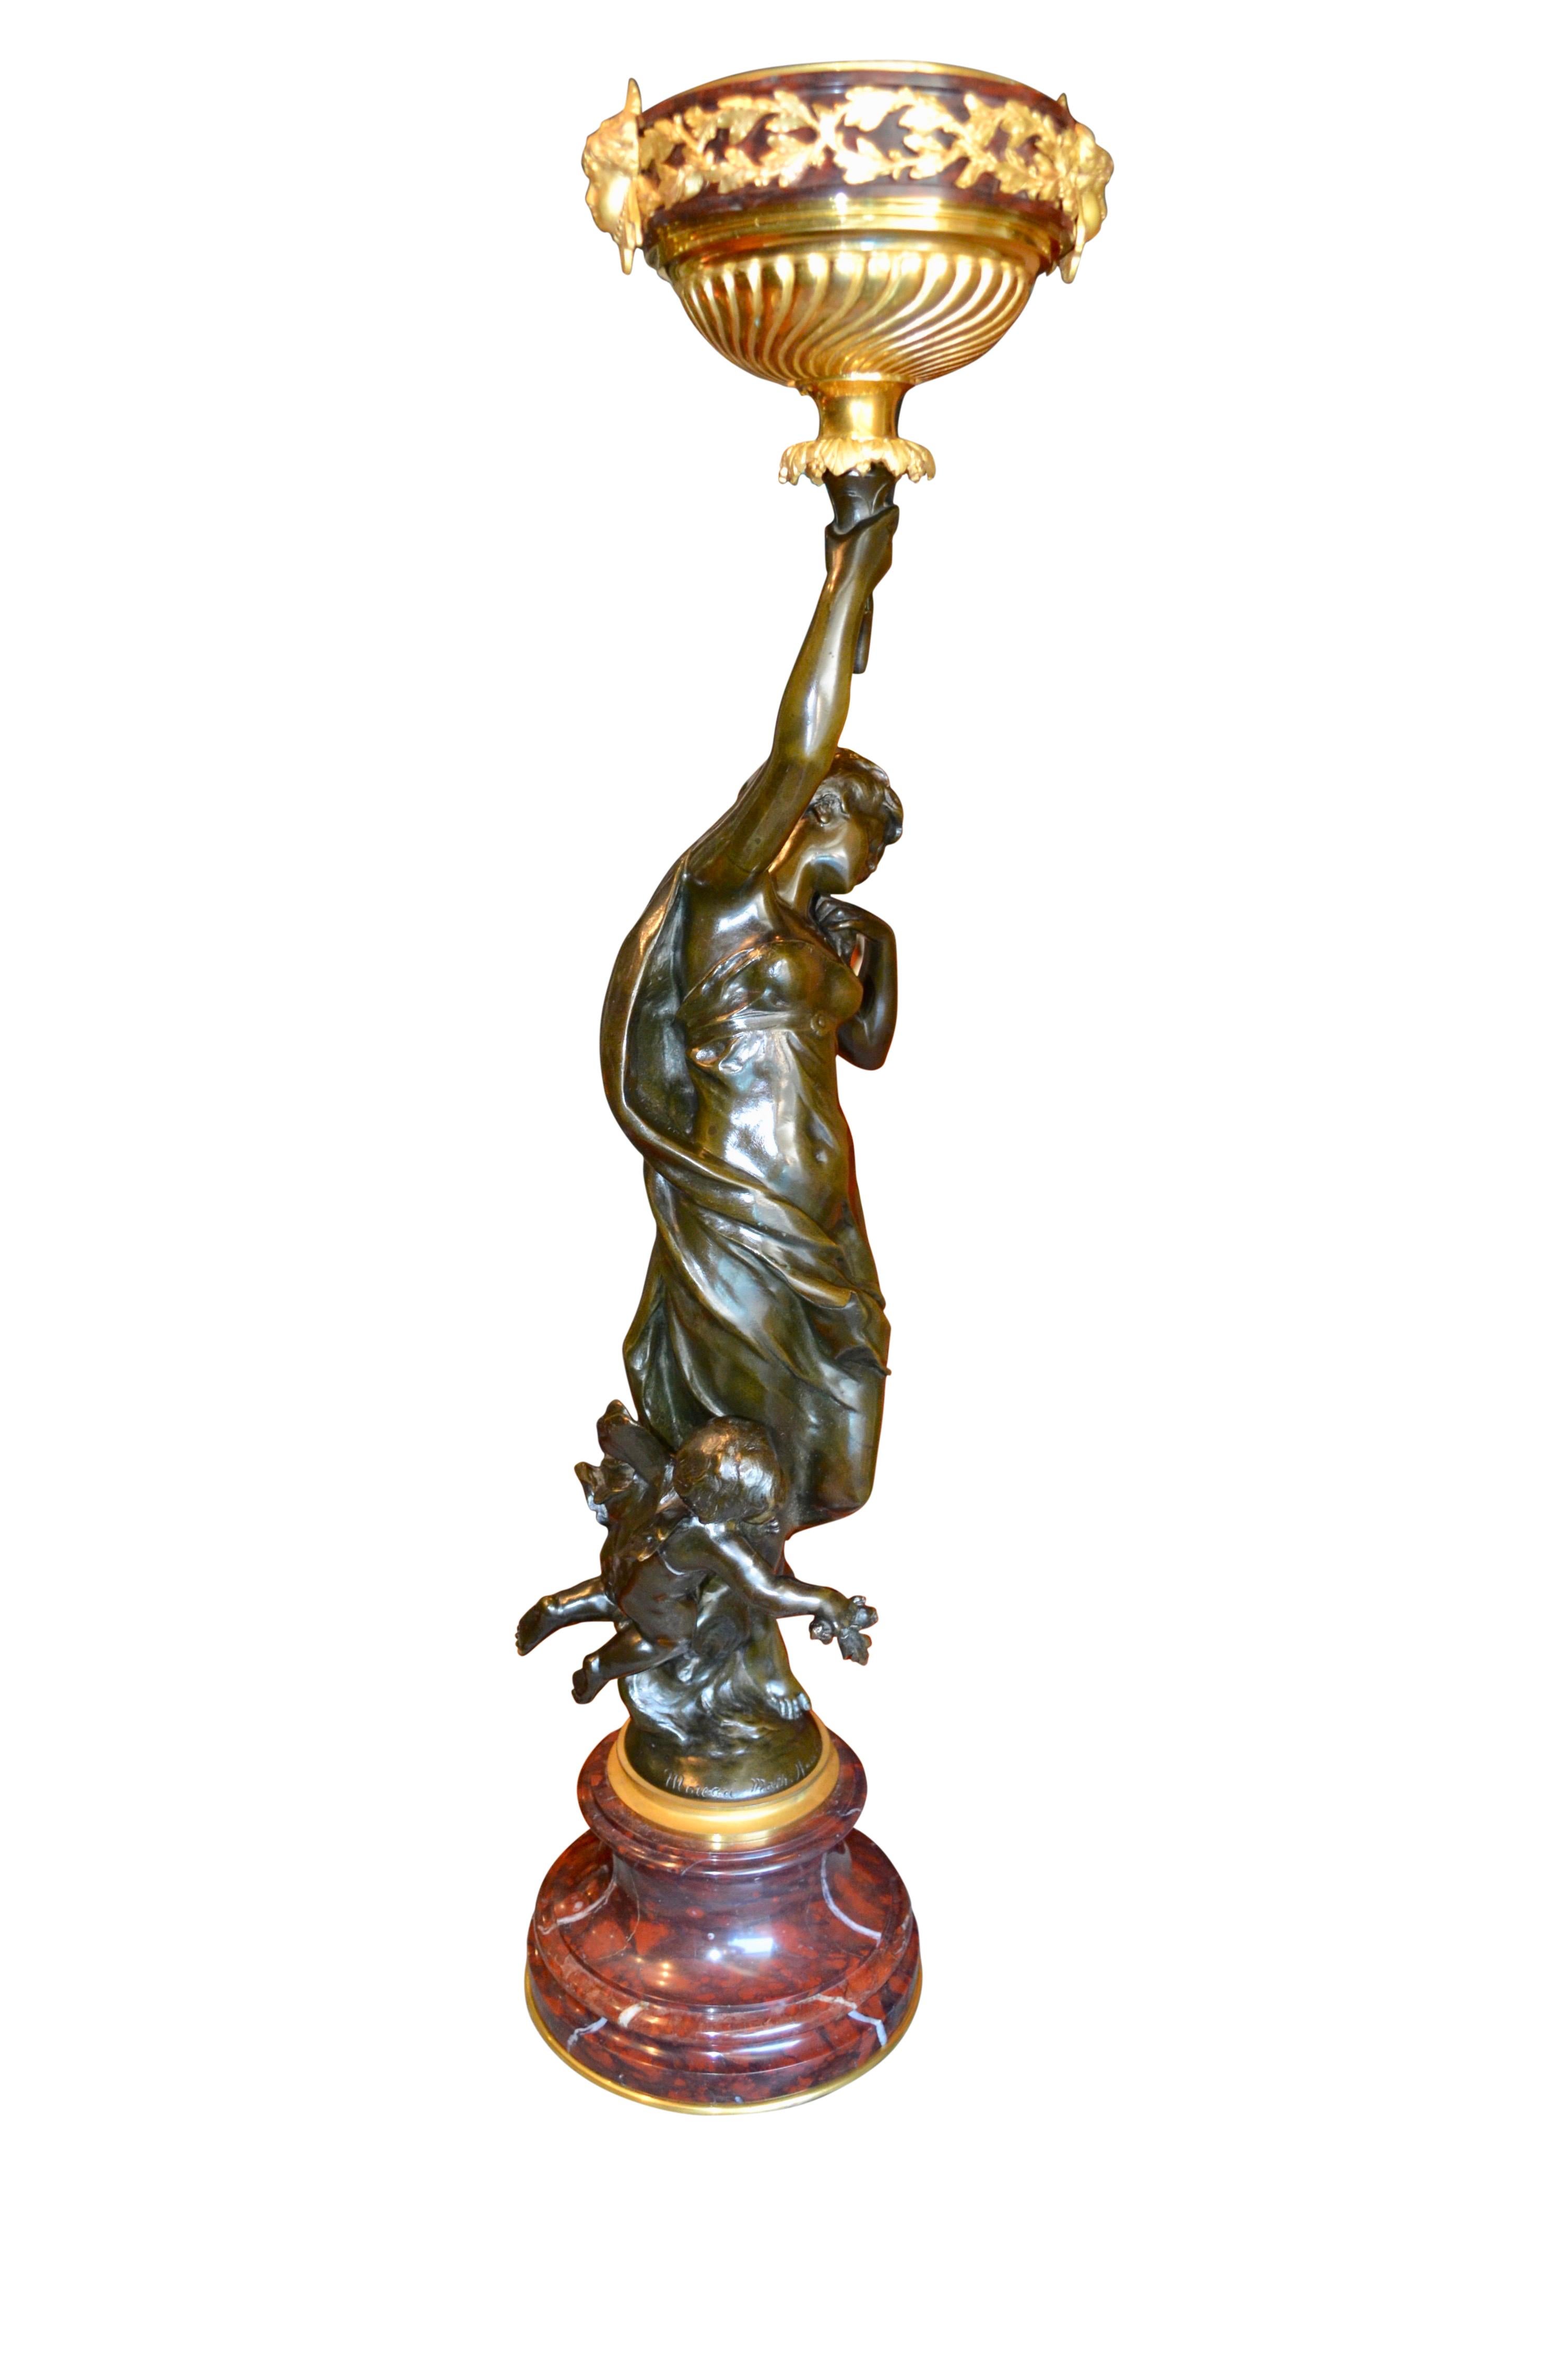 19th Century  Oil Lamp Featuring a Mathurin Moreau Bronze Statue of  a Nymph and Putto   For Sale